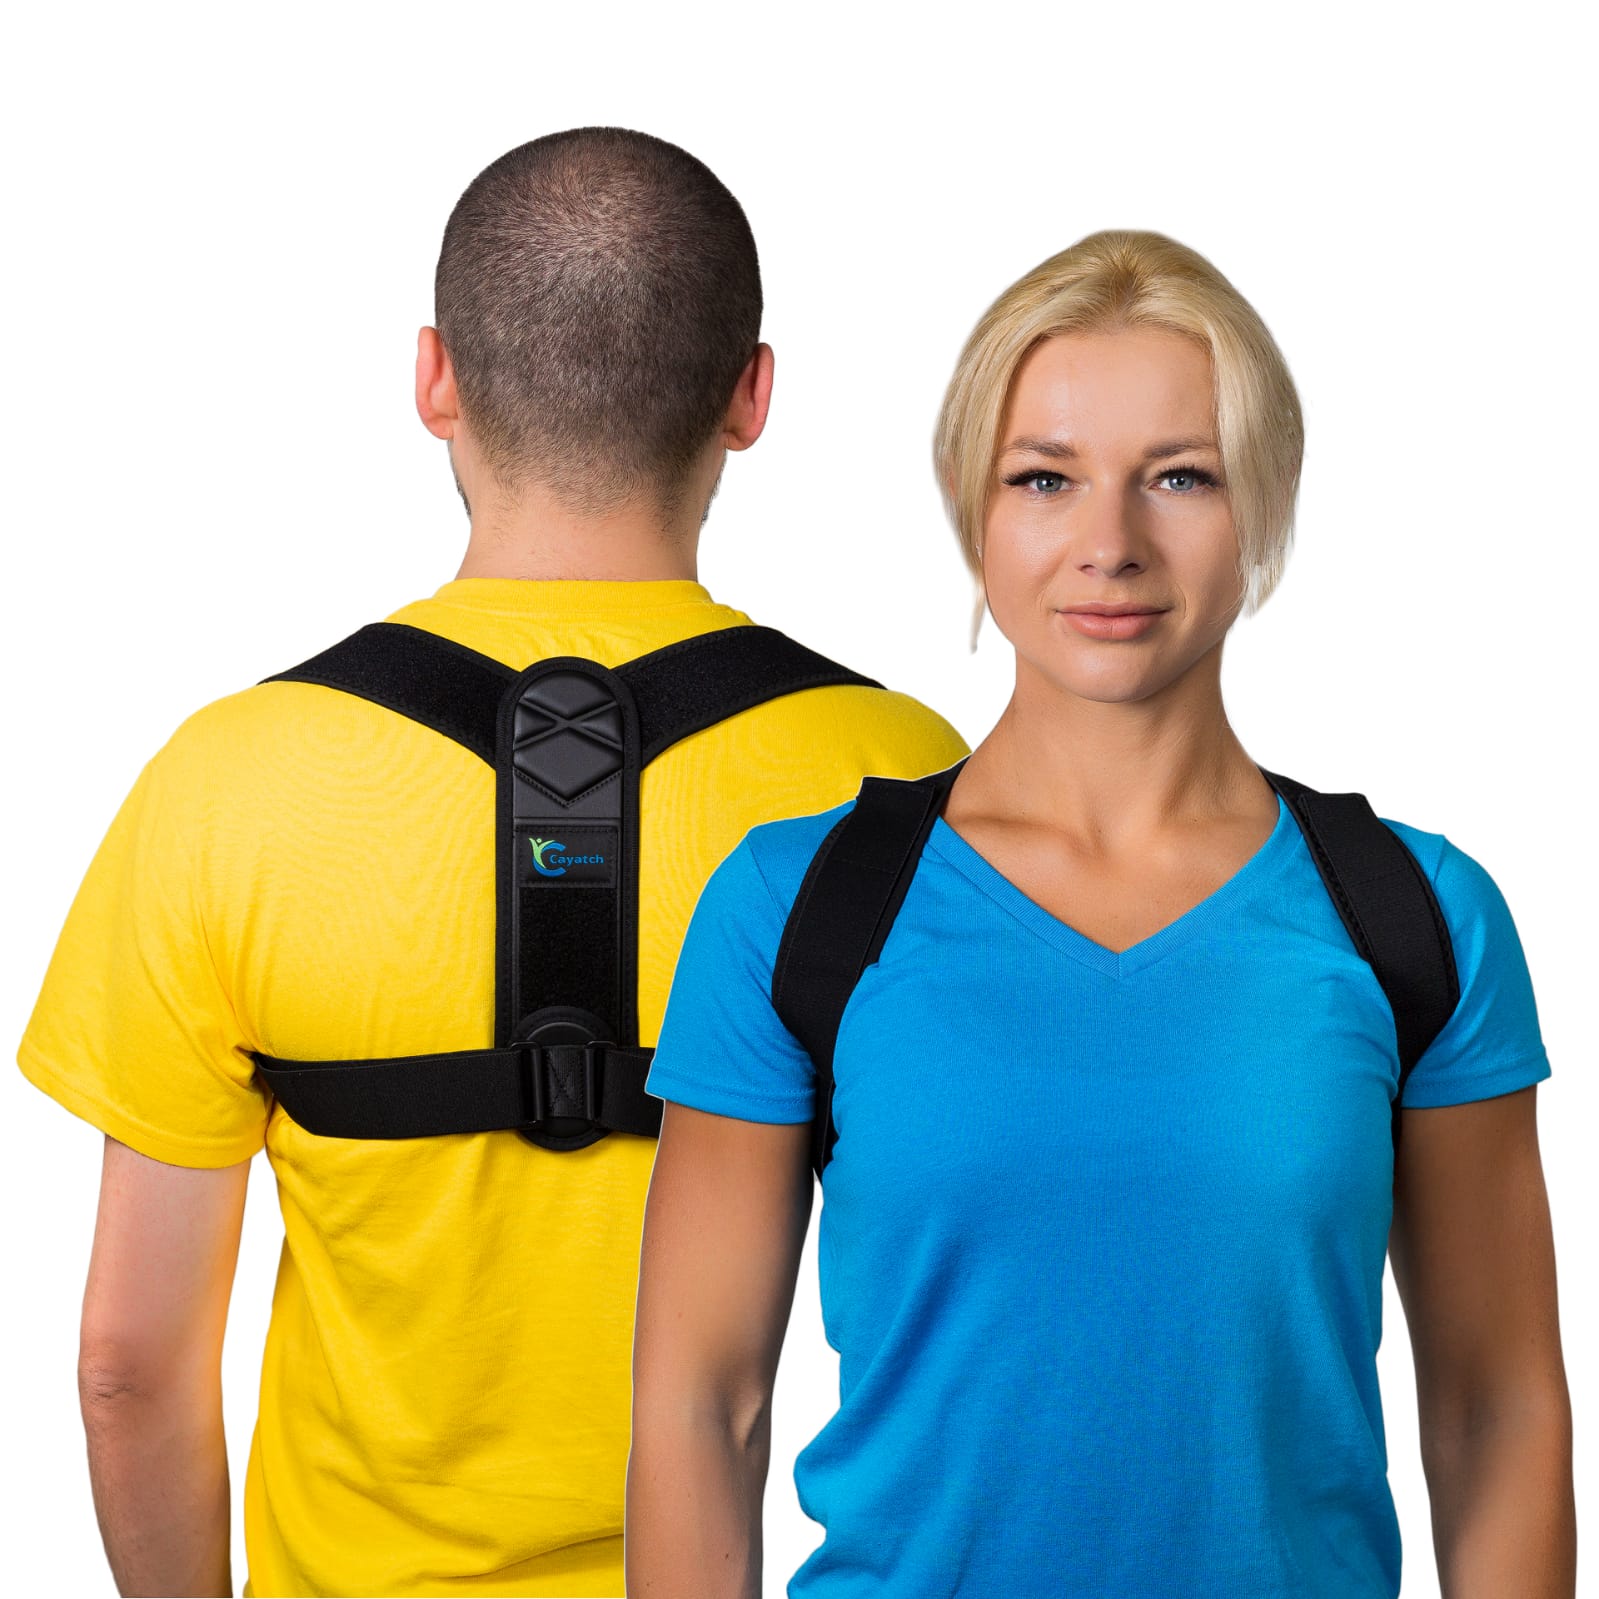 Orthopedic Best Back Brace Posture Corrector for Women & Men With Dual Adjustment System | One Size Fits Most